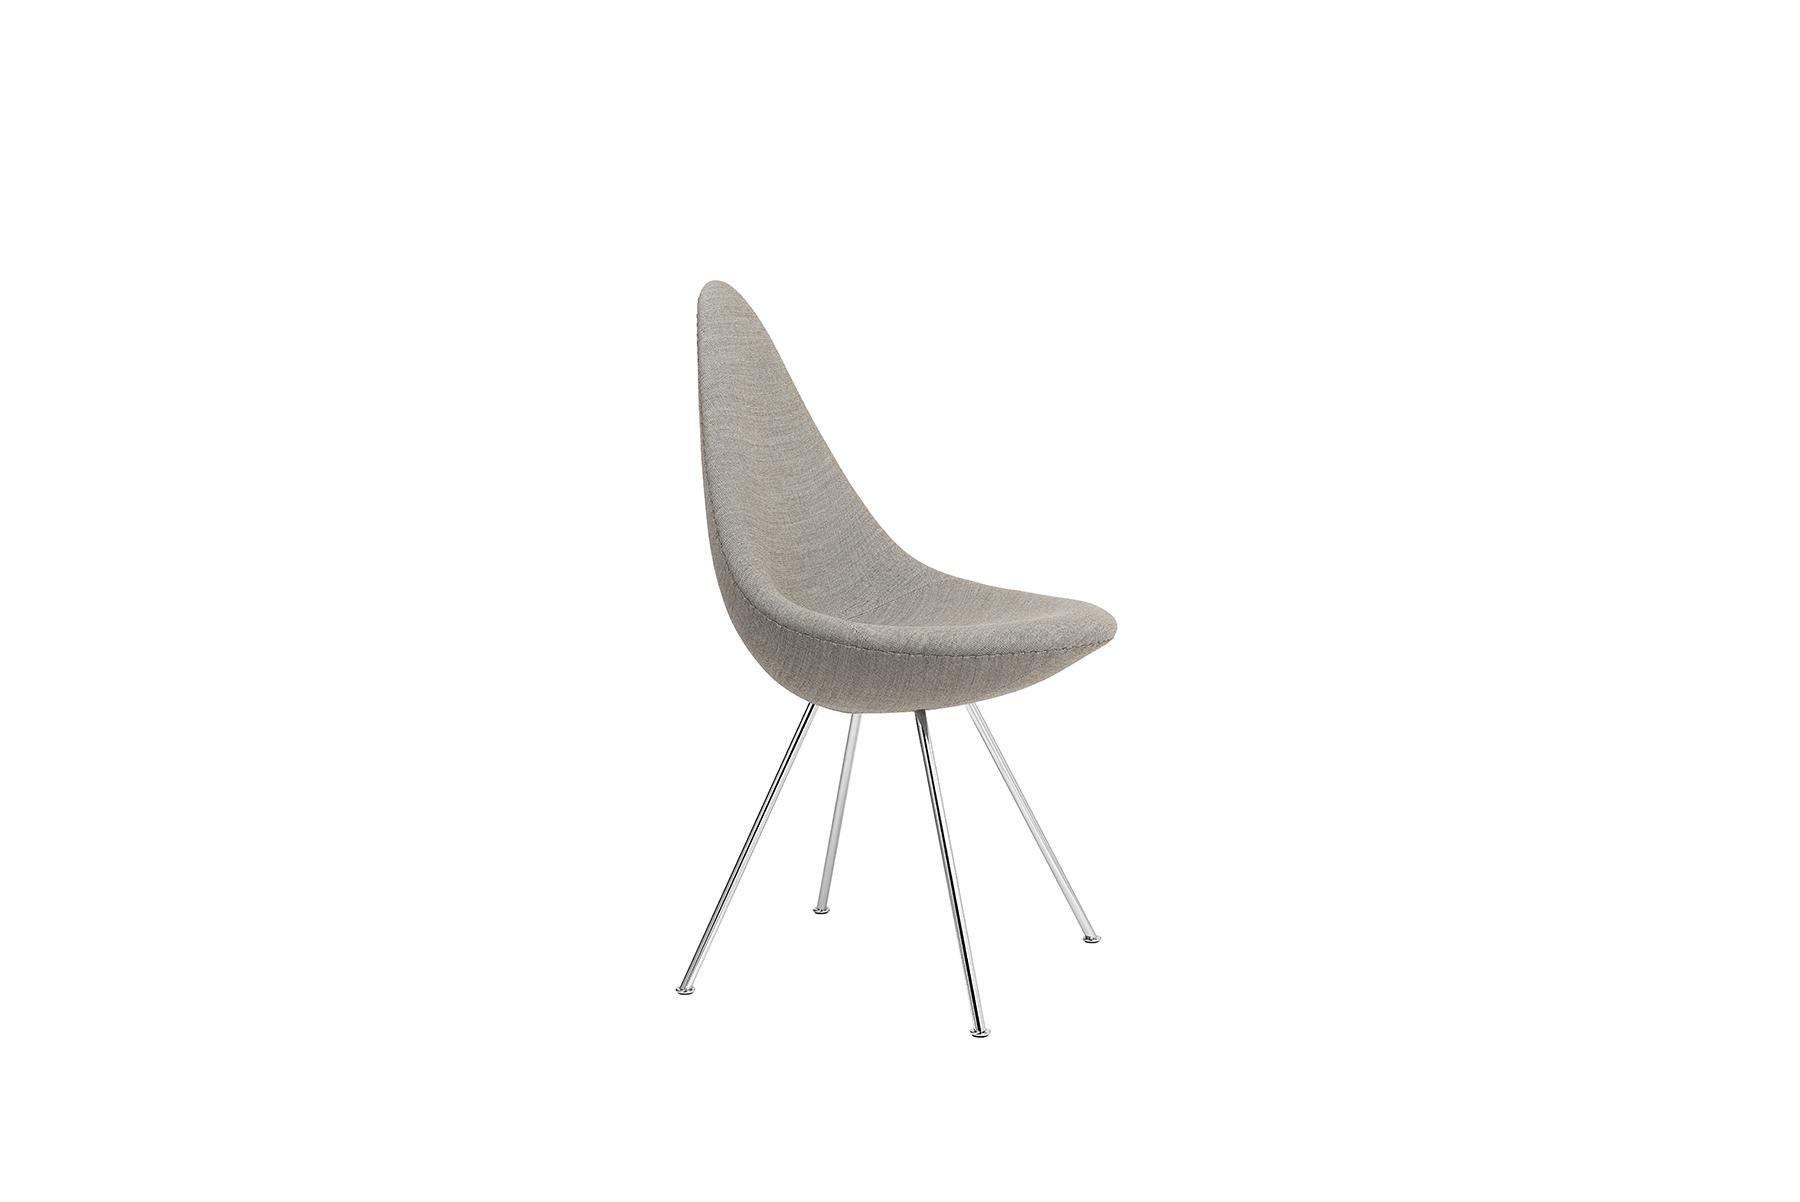 The fully upholstered Drop blends elegantly into a wide variety of settings as a great example of furniture design that is able to influence and elevate an entire room by its mere presence and beauty. Arne Jacobsen originally designed it for the SAS